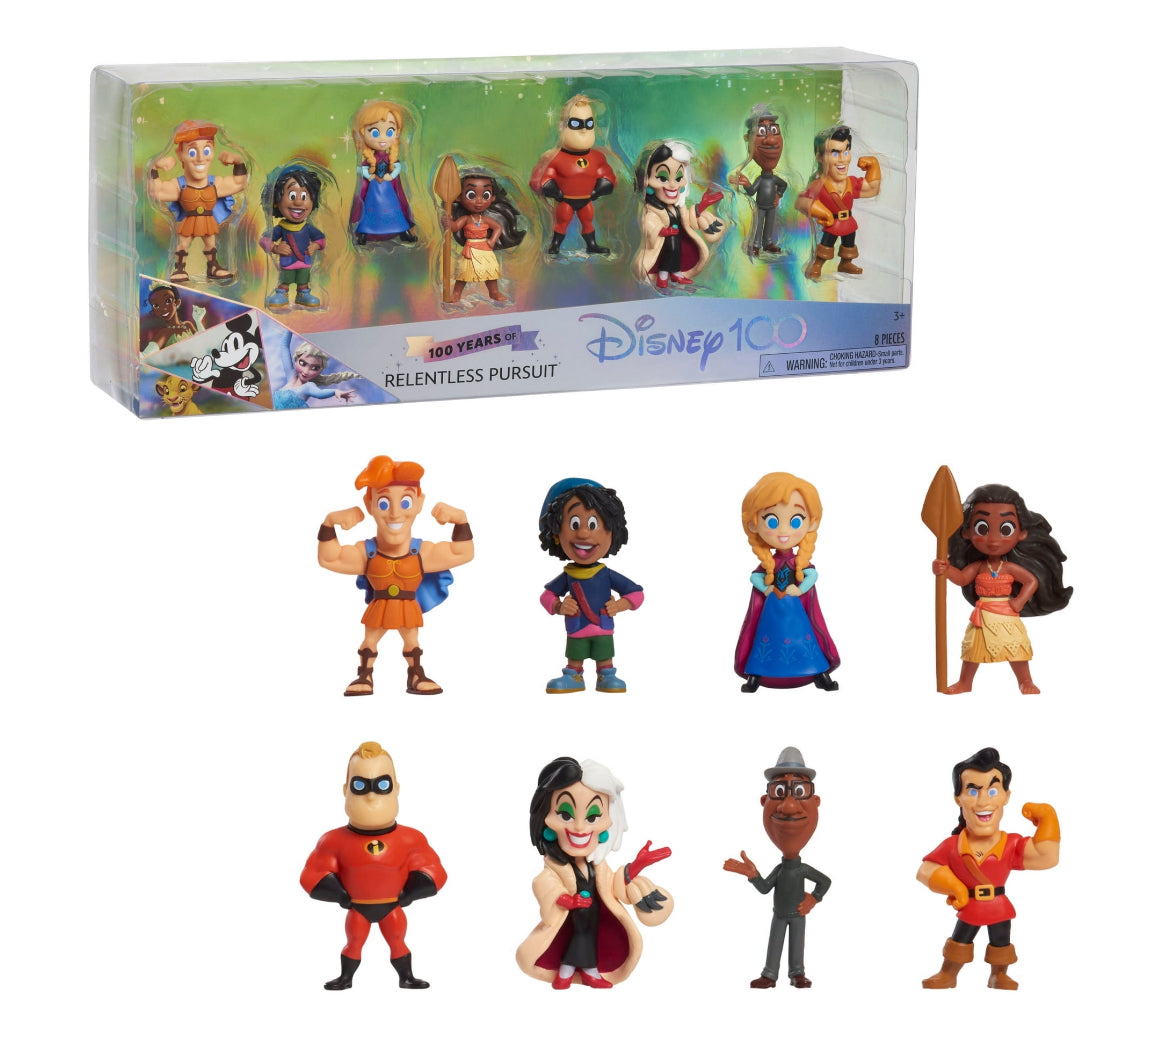 Disney100 Years of Relentless Pursuit Celebration Collection Limited Edition 8-Piece Figure Pack 46037